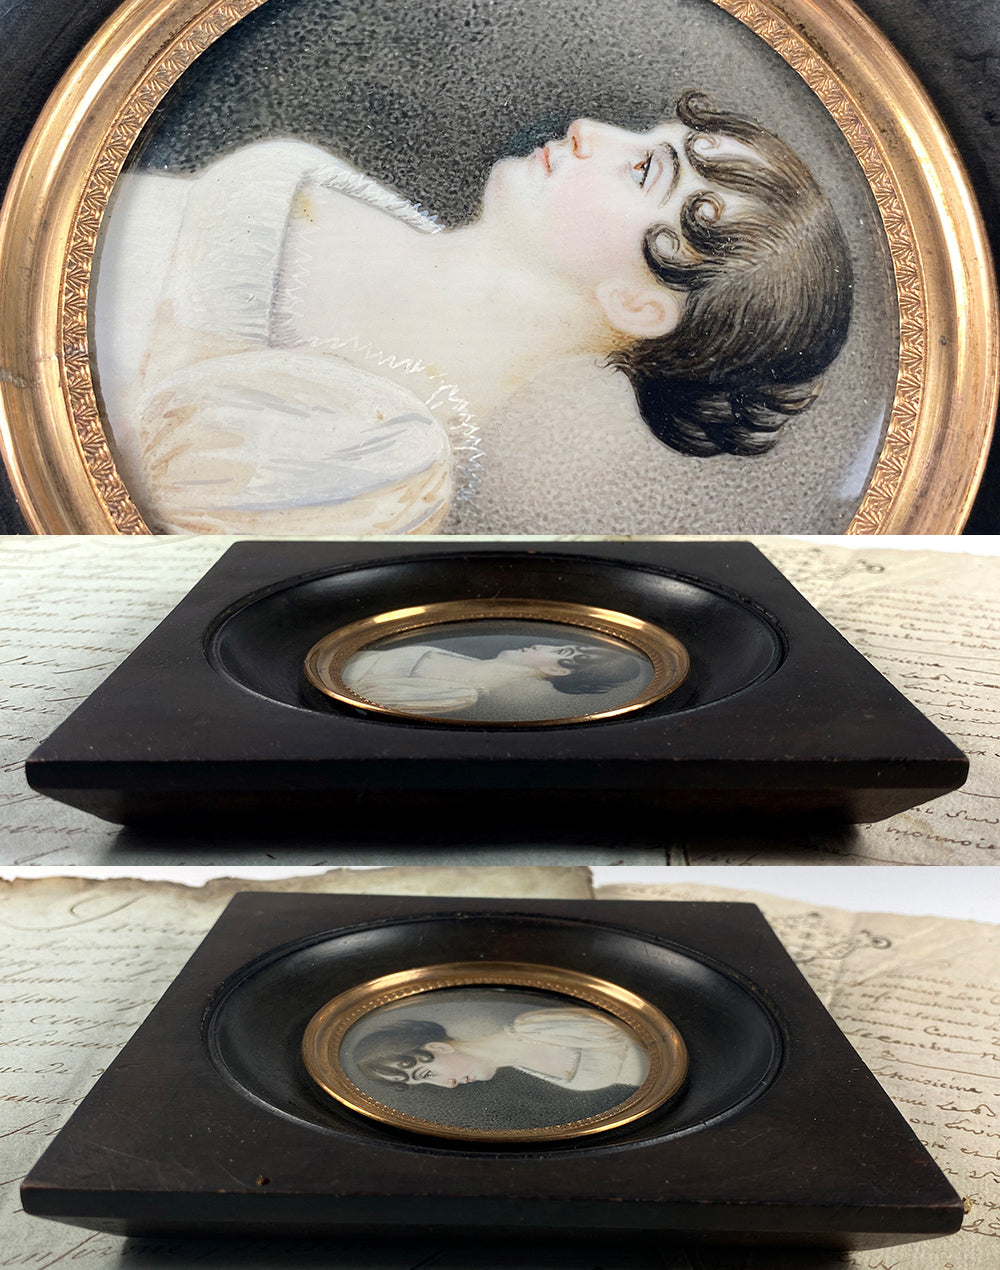 Antique French Empire Portrait Miniature in Silhouette, Beautiful Young Woman c.1810